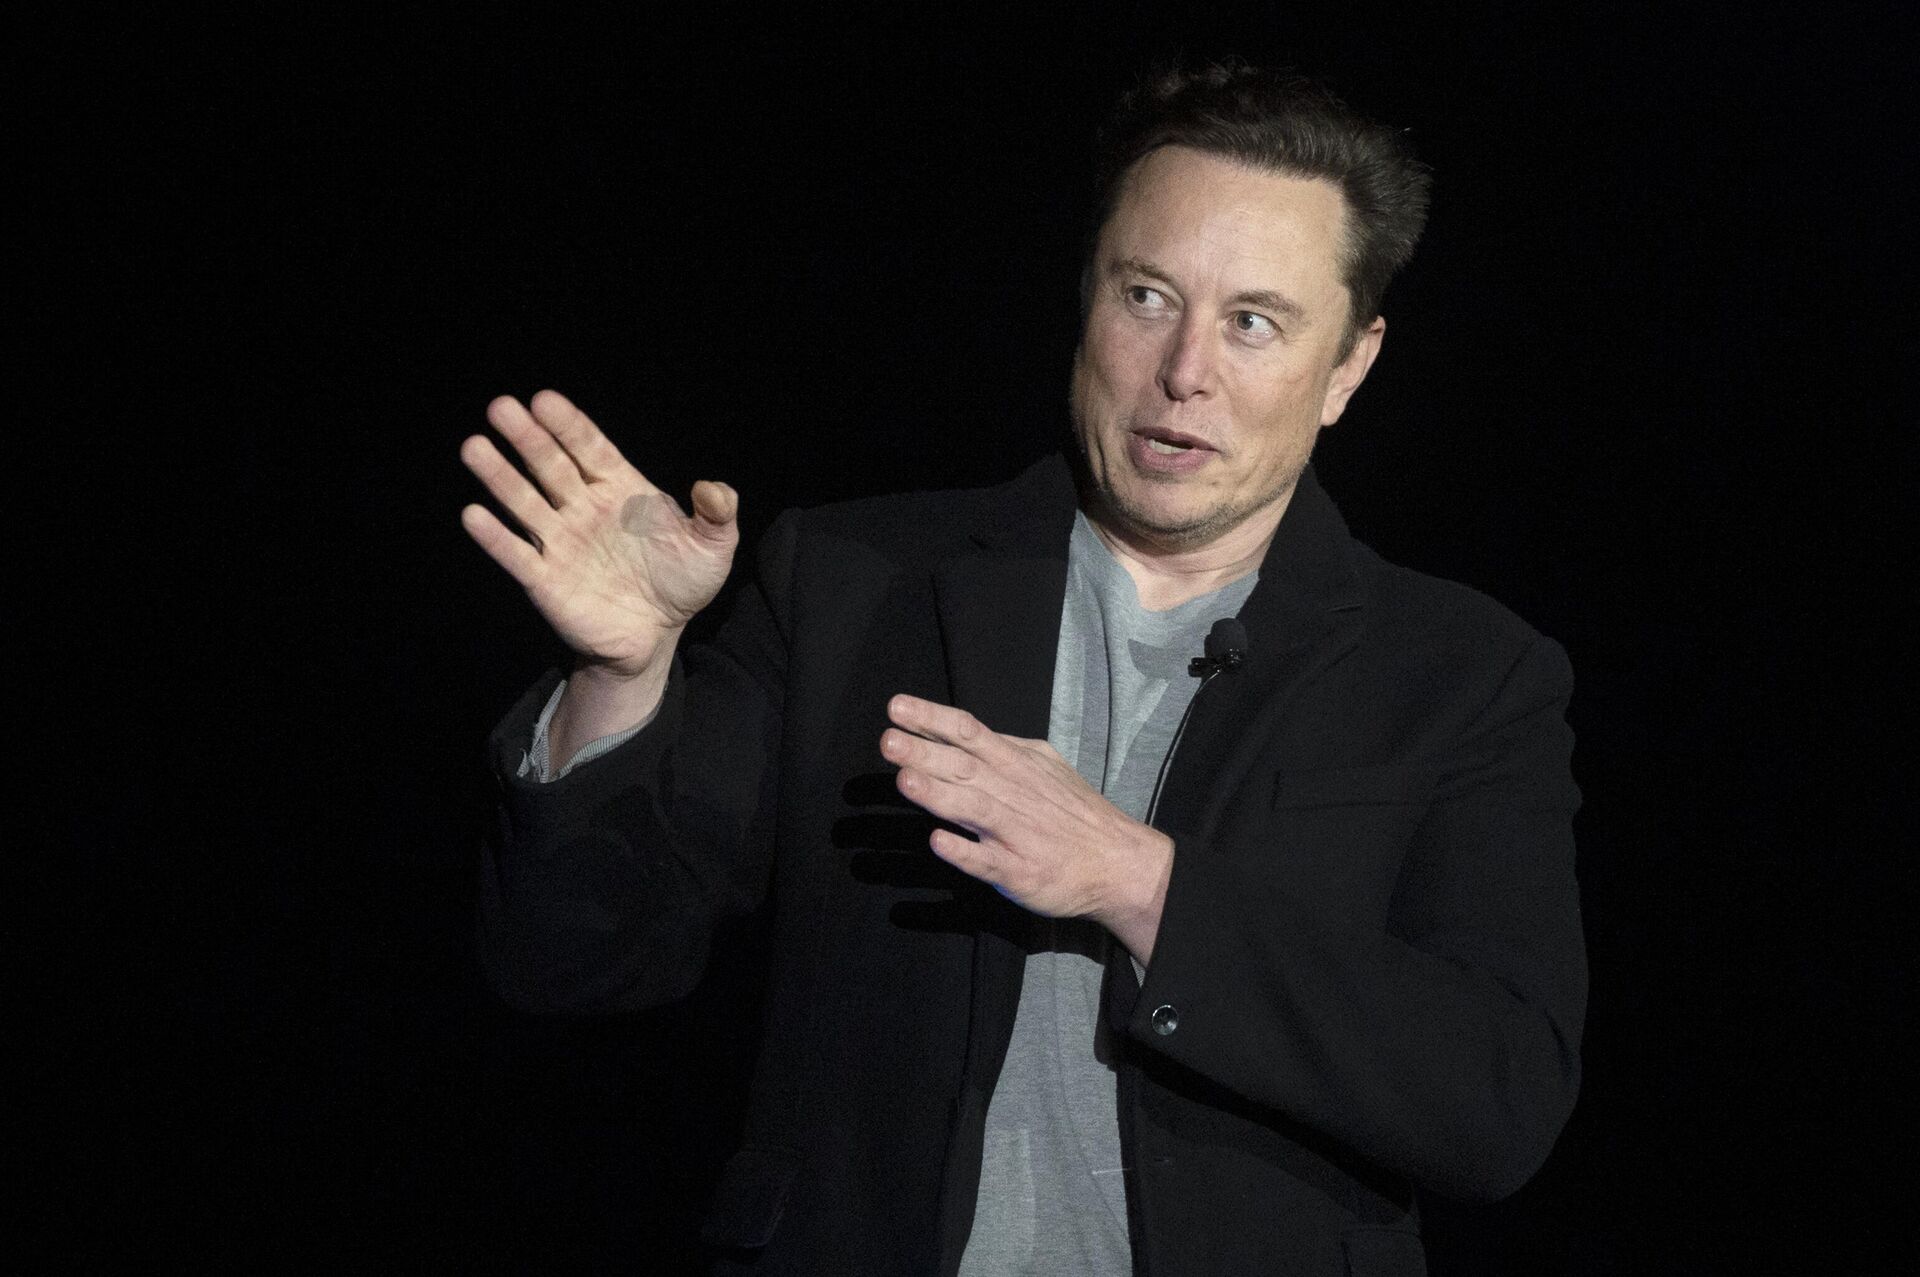 Elon Musk gestures as he speaks during a press conference at SpaceX's Starbase facility near Boca Chica Village in South Texas, on February 10, 2022. - Sputnik International, 1920, 04.01.2023